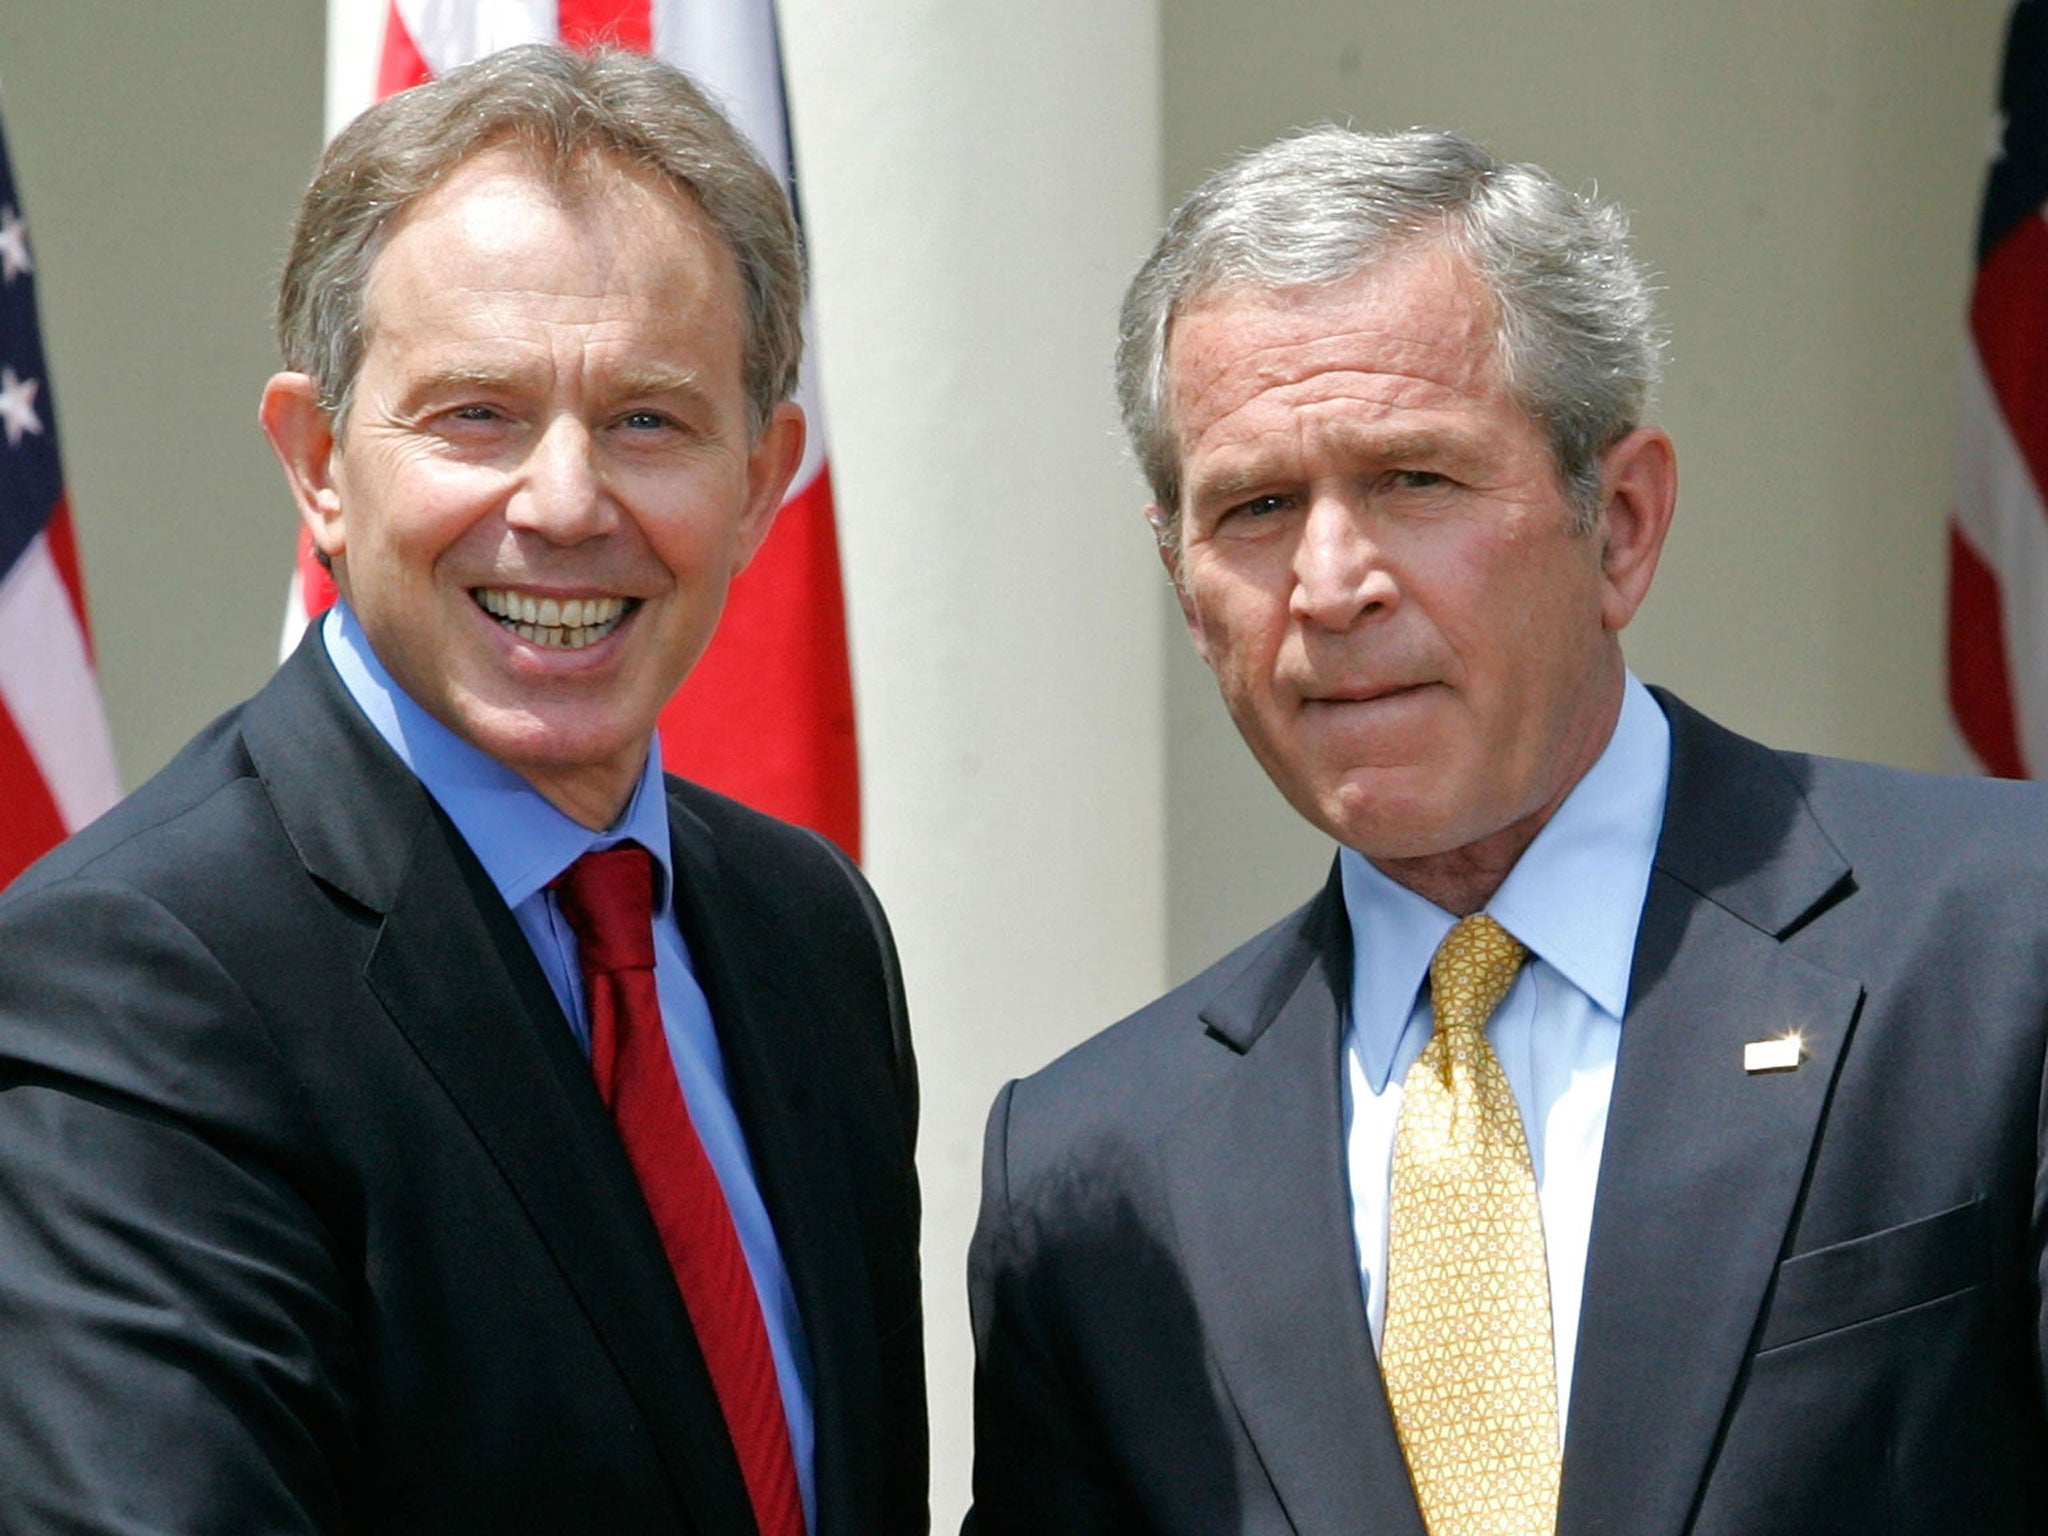 Does the Afghanistan exit mark the end of the Blair-Bush War on Terror?